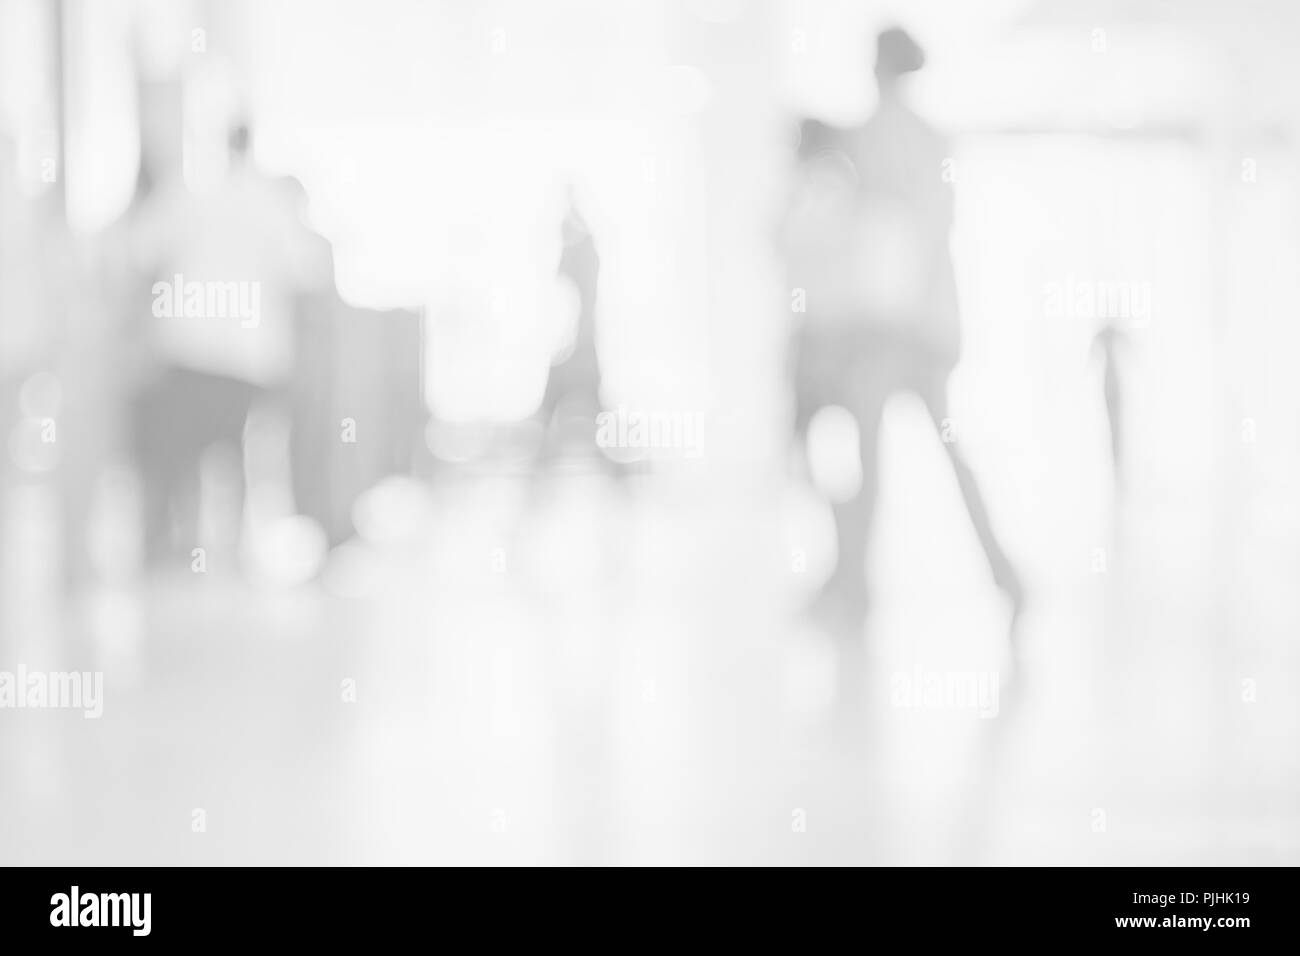 Blurred people walk on pathway Abstract white grey background for backdrop design, composition for , website, magazine or graphic for commercial campaign design Stock Photo